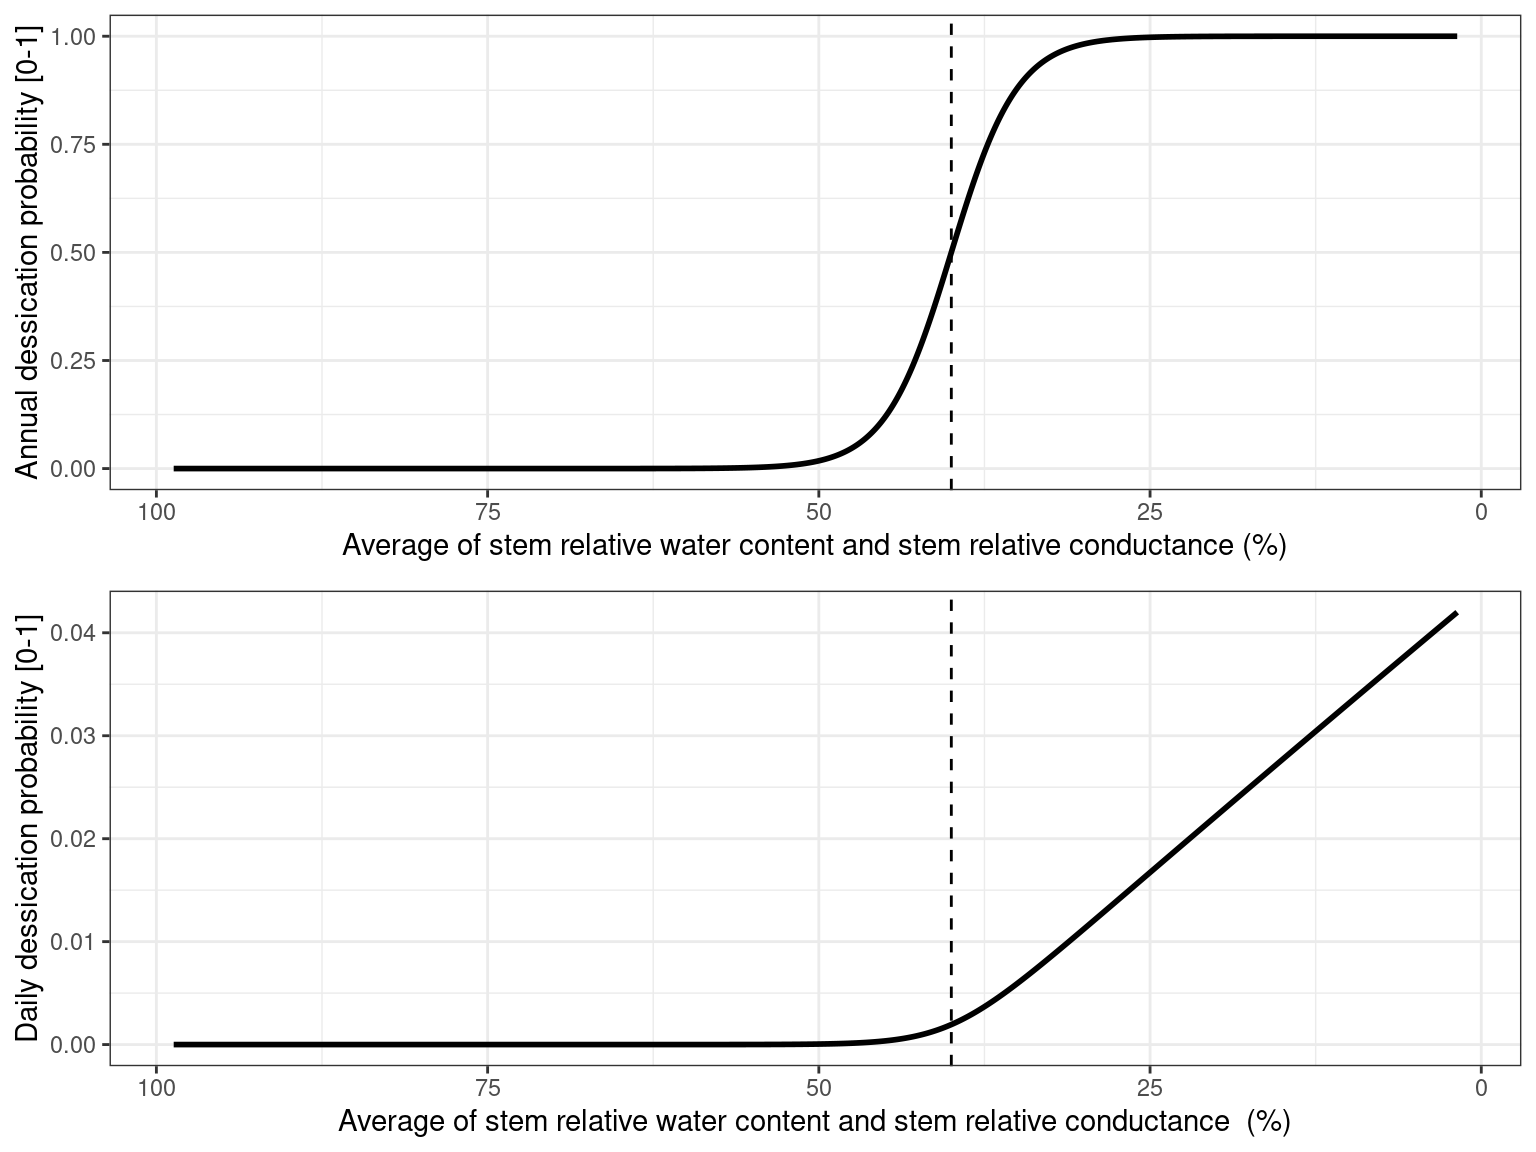 Annual (top) and daily (bottom) probability of dessication as a function of the average value of stem relative water content and stem relative hydraulic conductance.